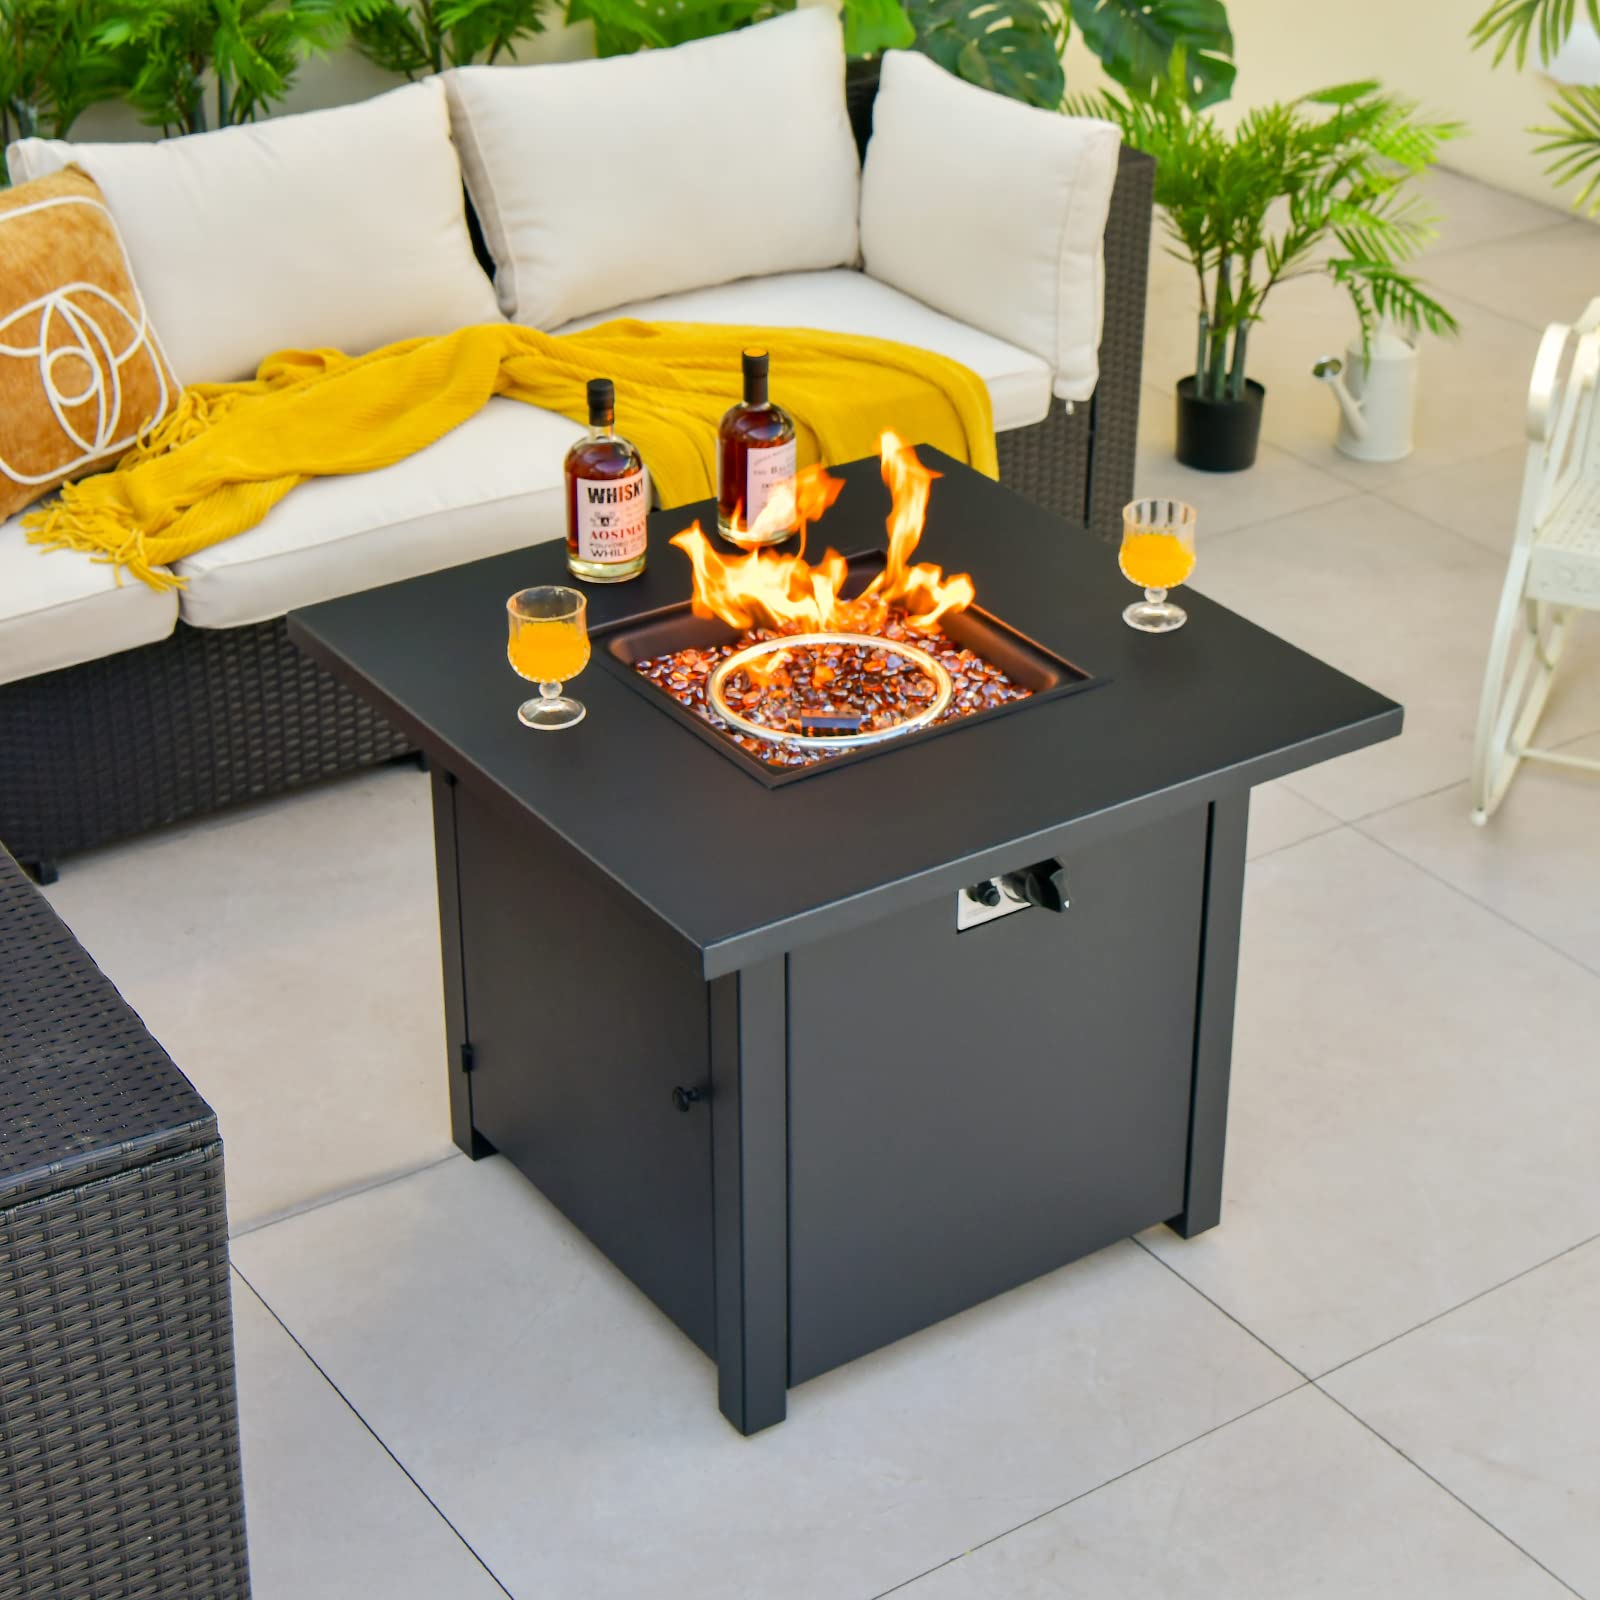 Giantex 32" Patio Propane Fire Table - 50,000 BTU Square Metal Fire Table with Lid, PVC Cover, Glass Stones